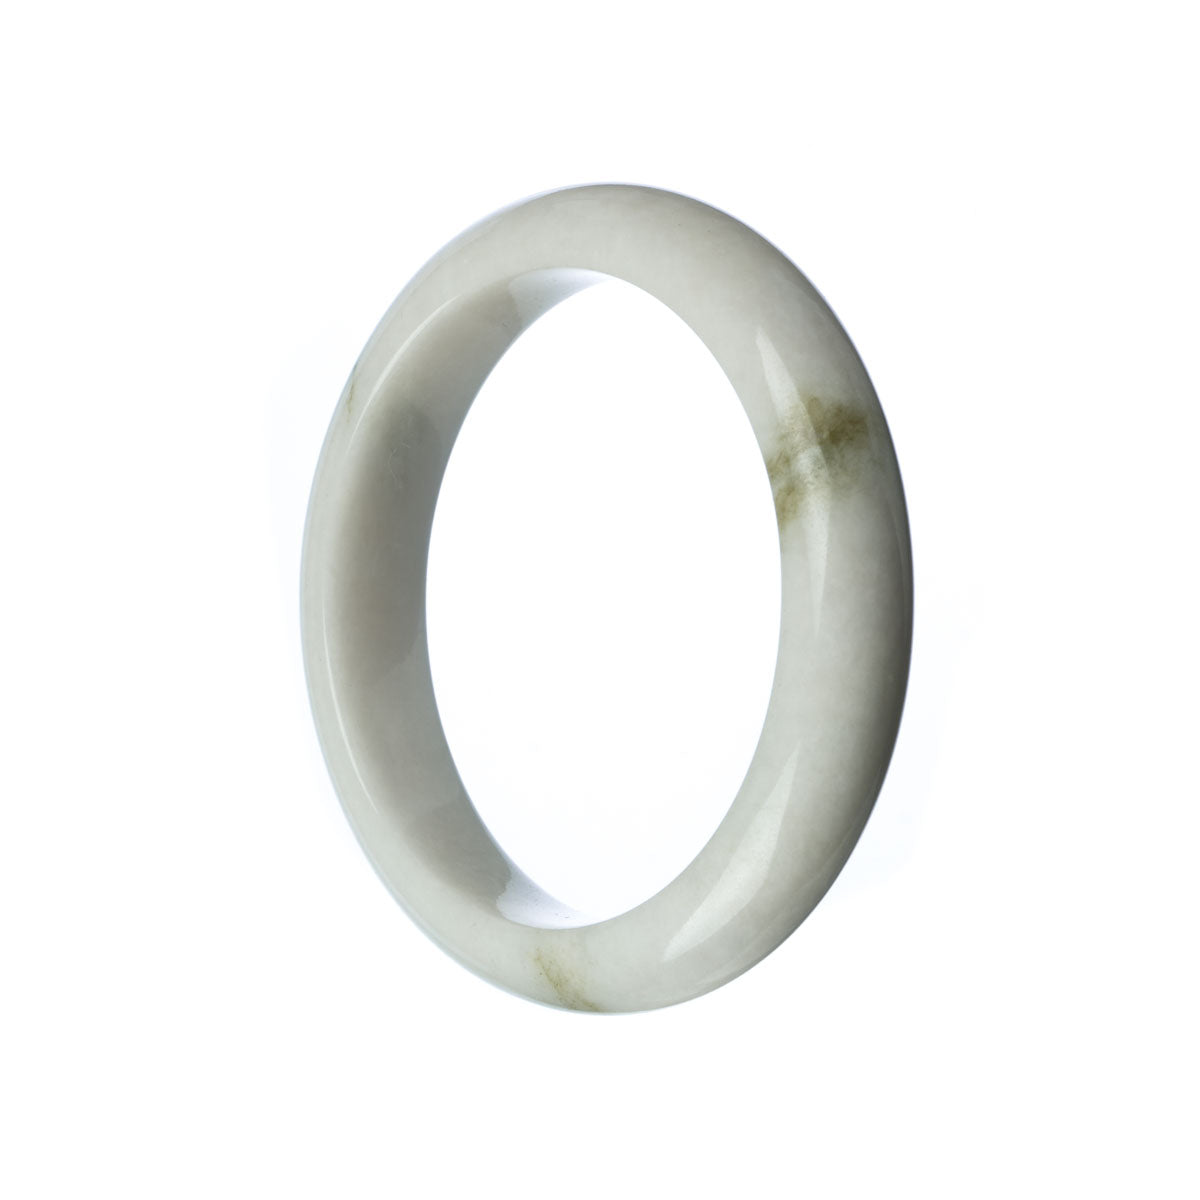 A close-up of a beautiful white jadeite jade bracelet with a half-moon design, measuring 58mm in diameter.